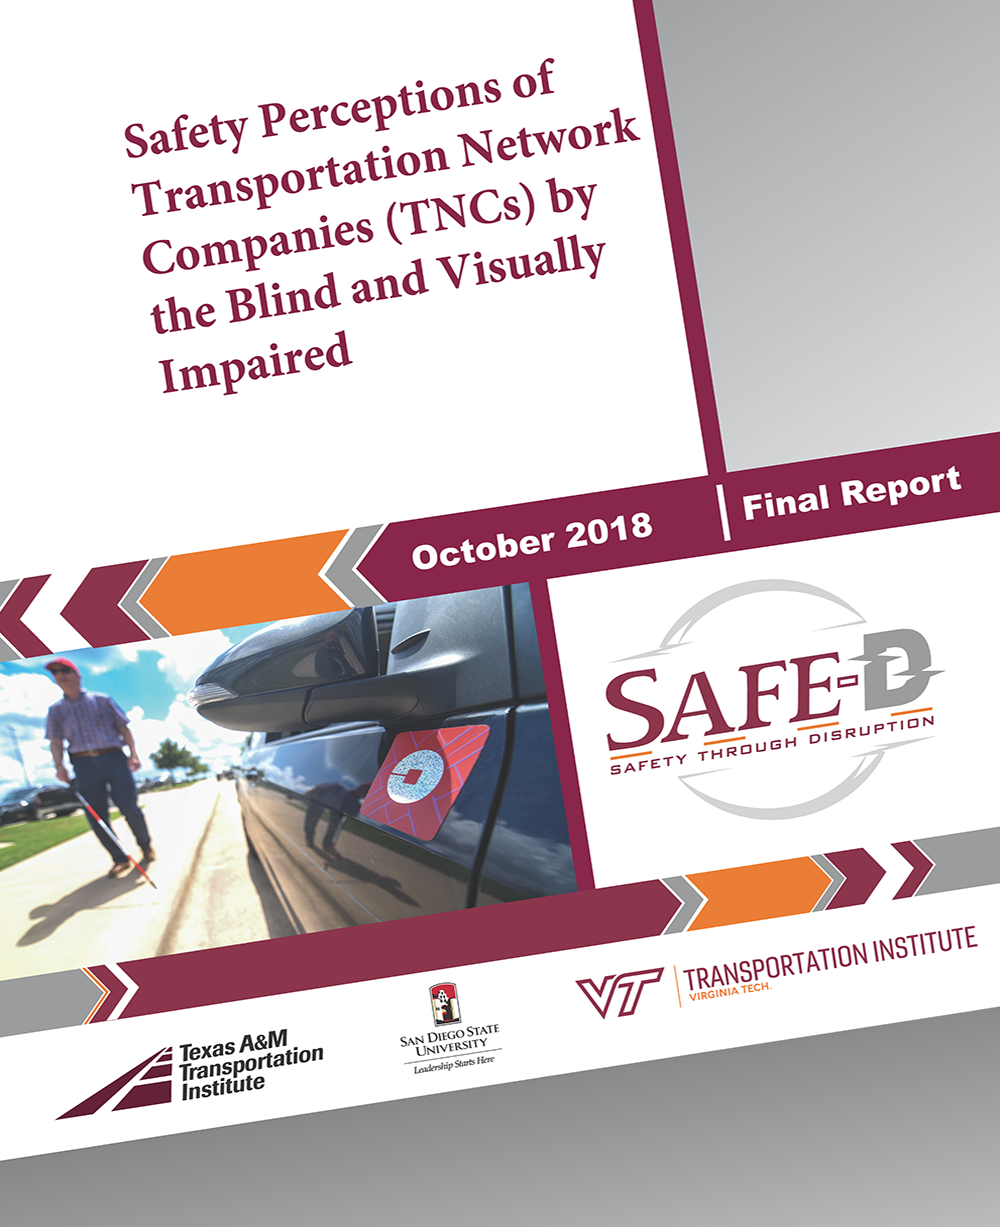 02-010 Final Research Report: Safety Perceptions of Transportation Network Companies (TNCs) by the Blind and Visually Impaired